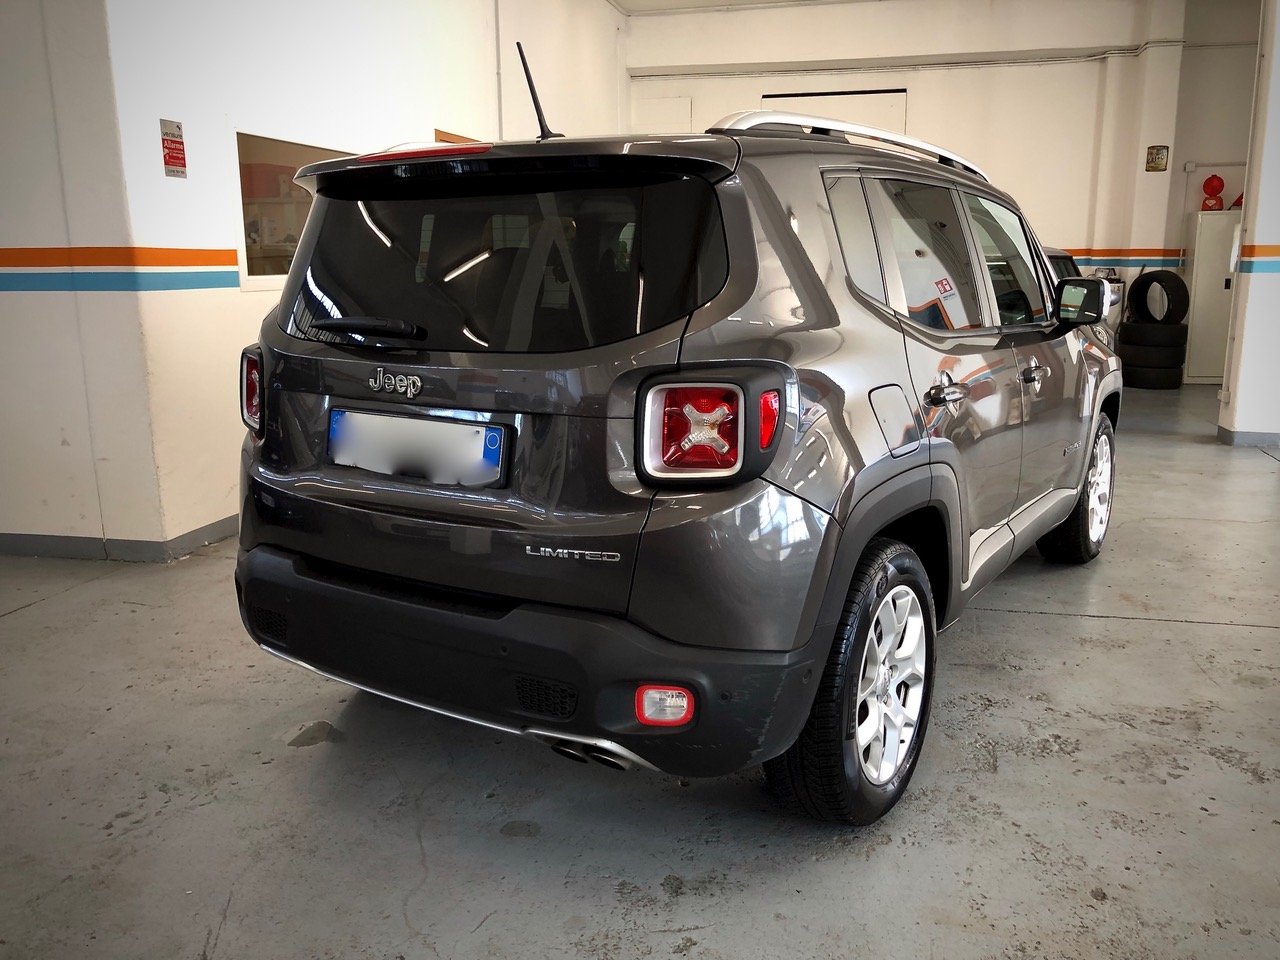 Jeep Renegade 1.4 MultiAir DDCT LimitedAutomaticaTetto